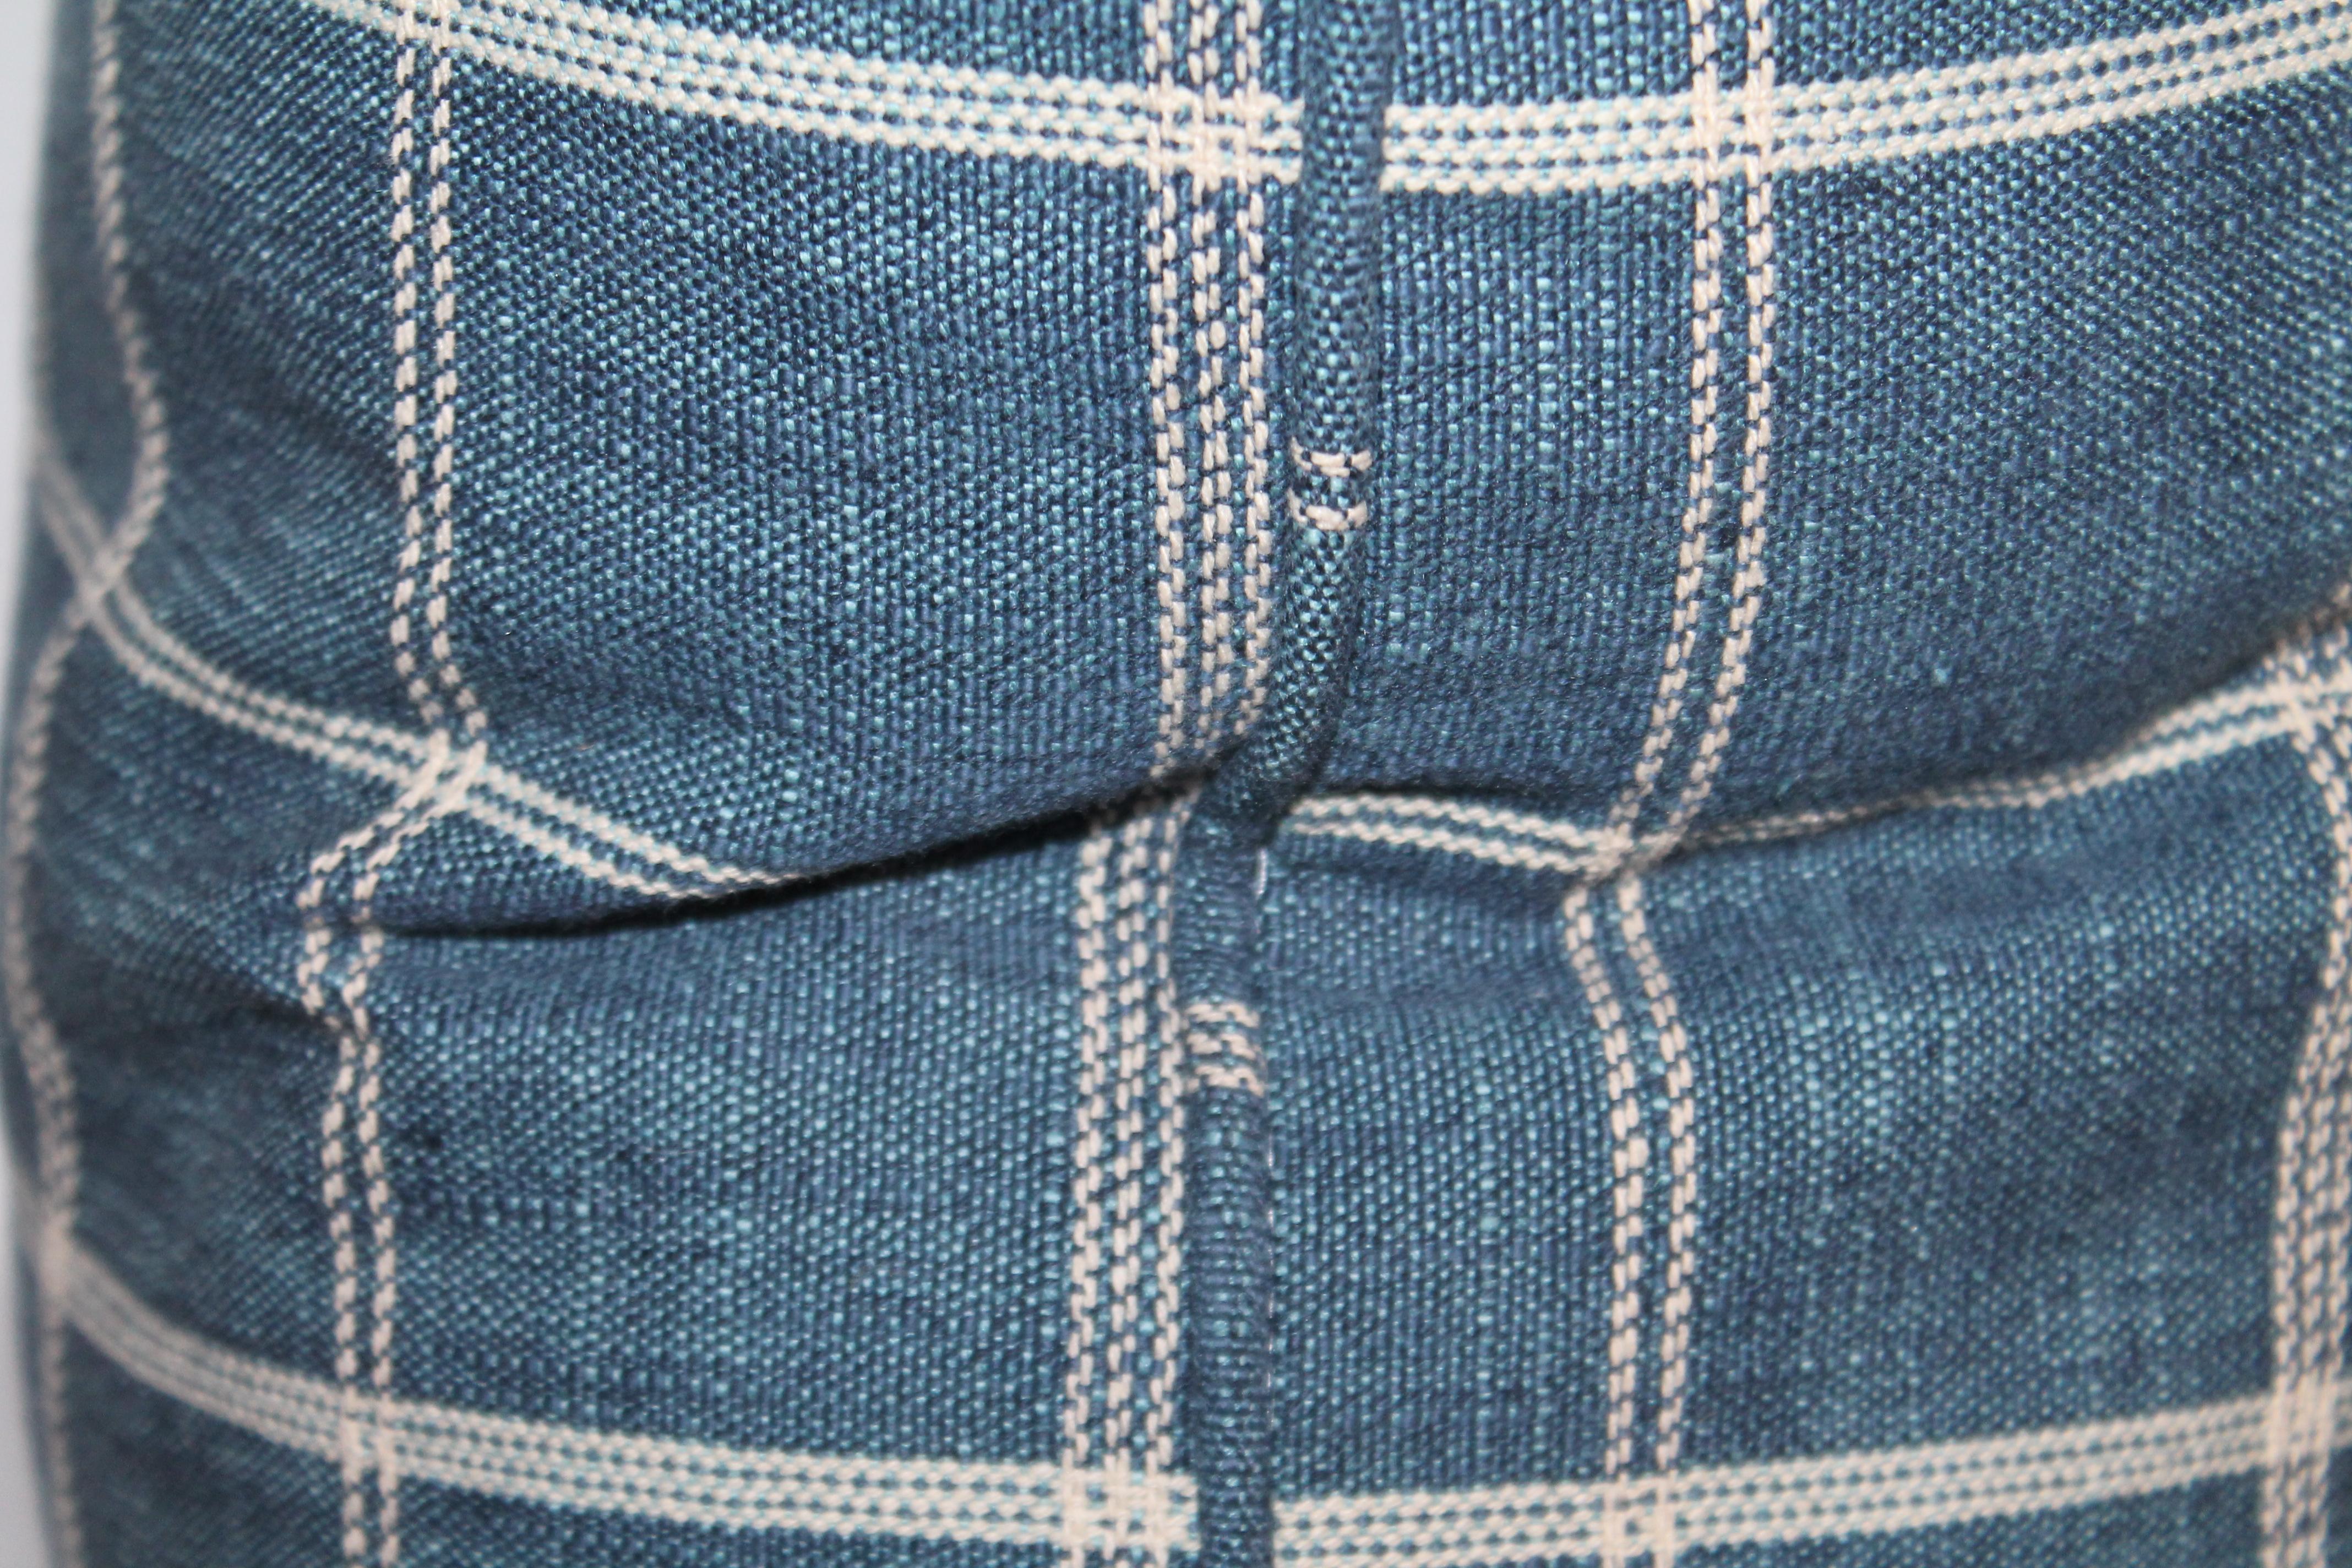 American Blue Linen Striped Pillows, Pair For Sale